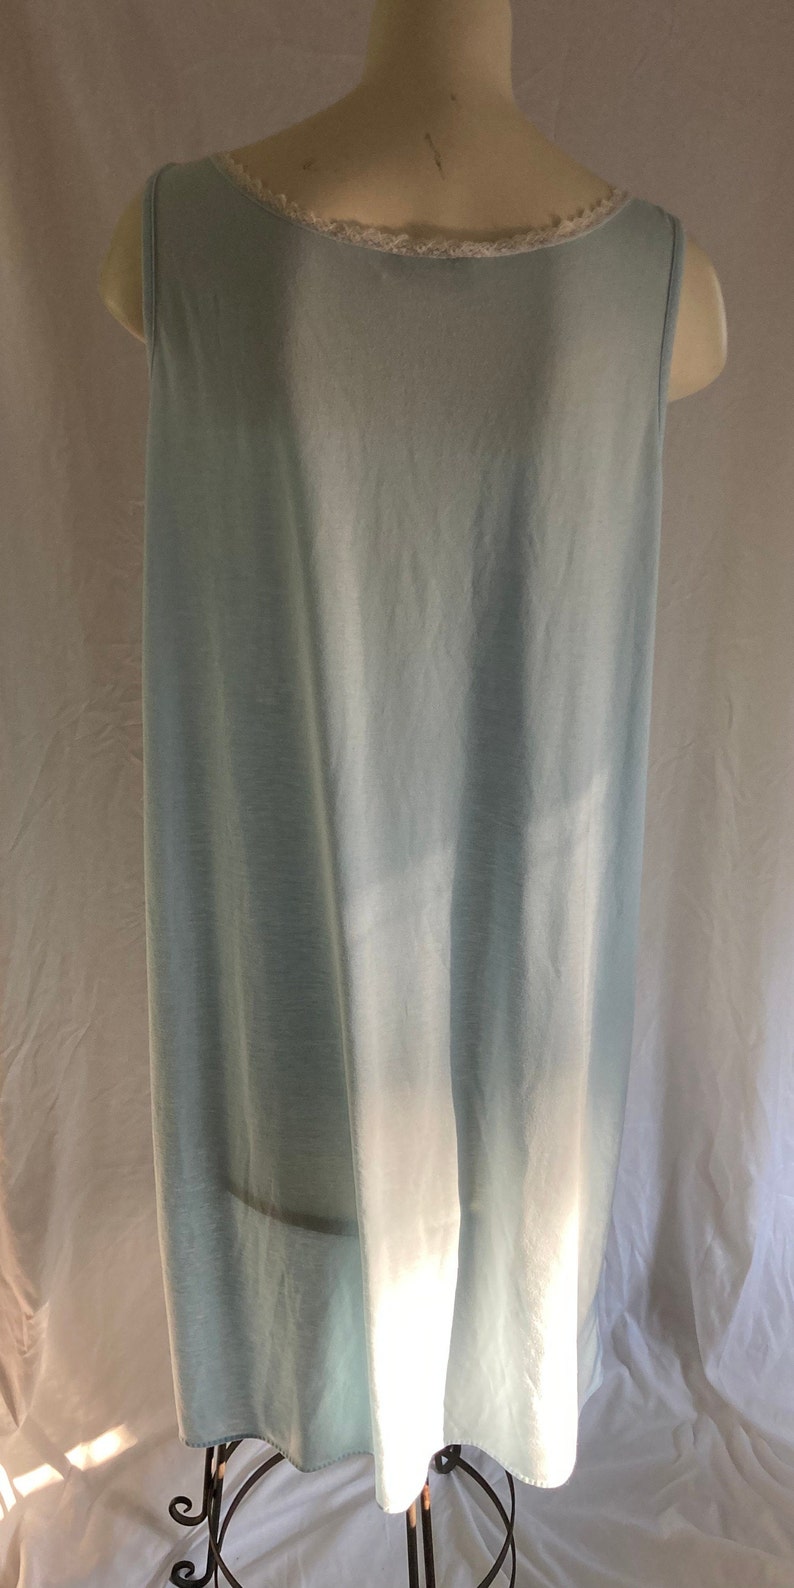 Vintage Pastel Blue Sleeveless Mid Length Soft Cotton or Blend Nightgown By Vandemere Est. Size Women's M image 7